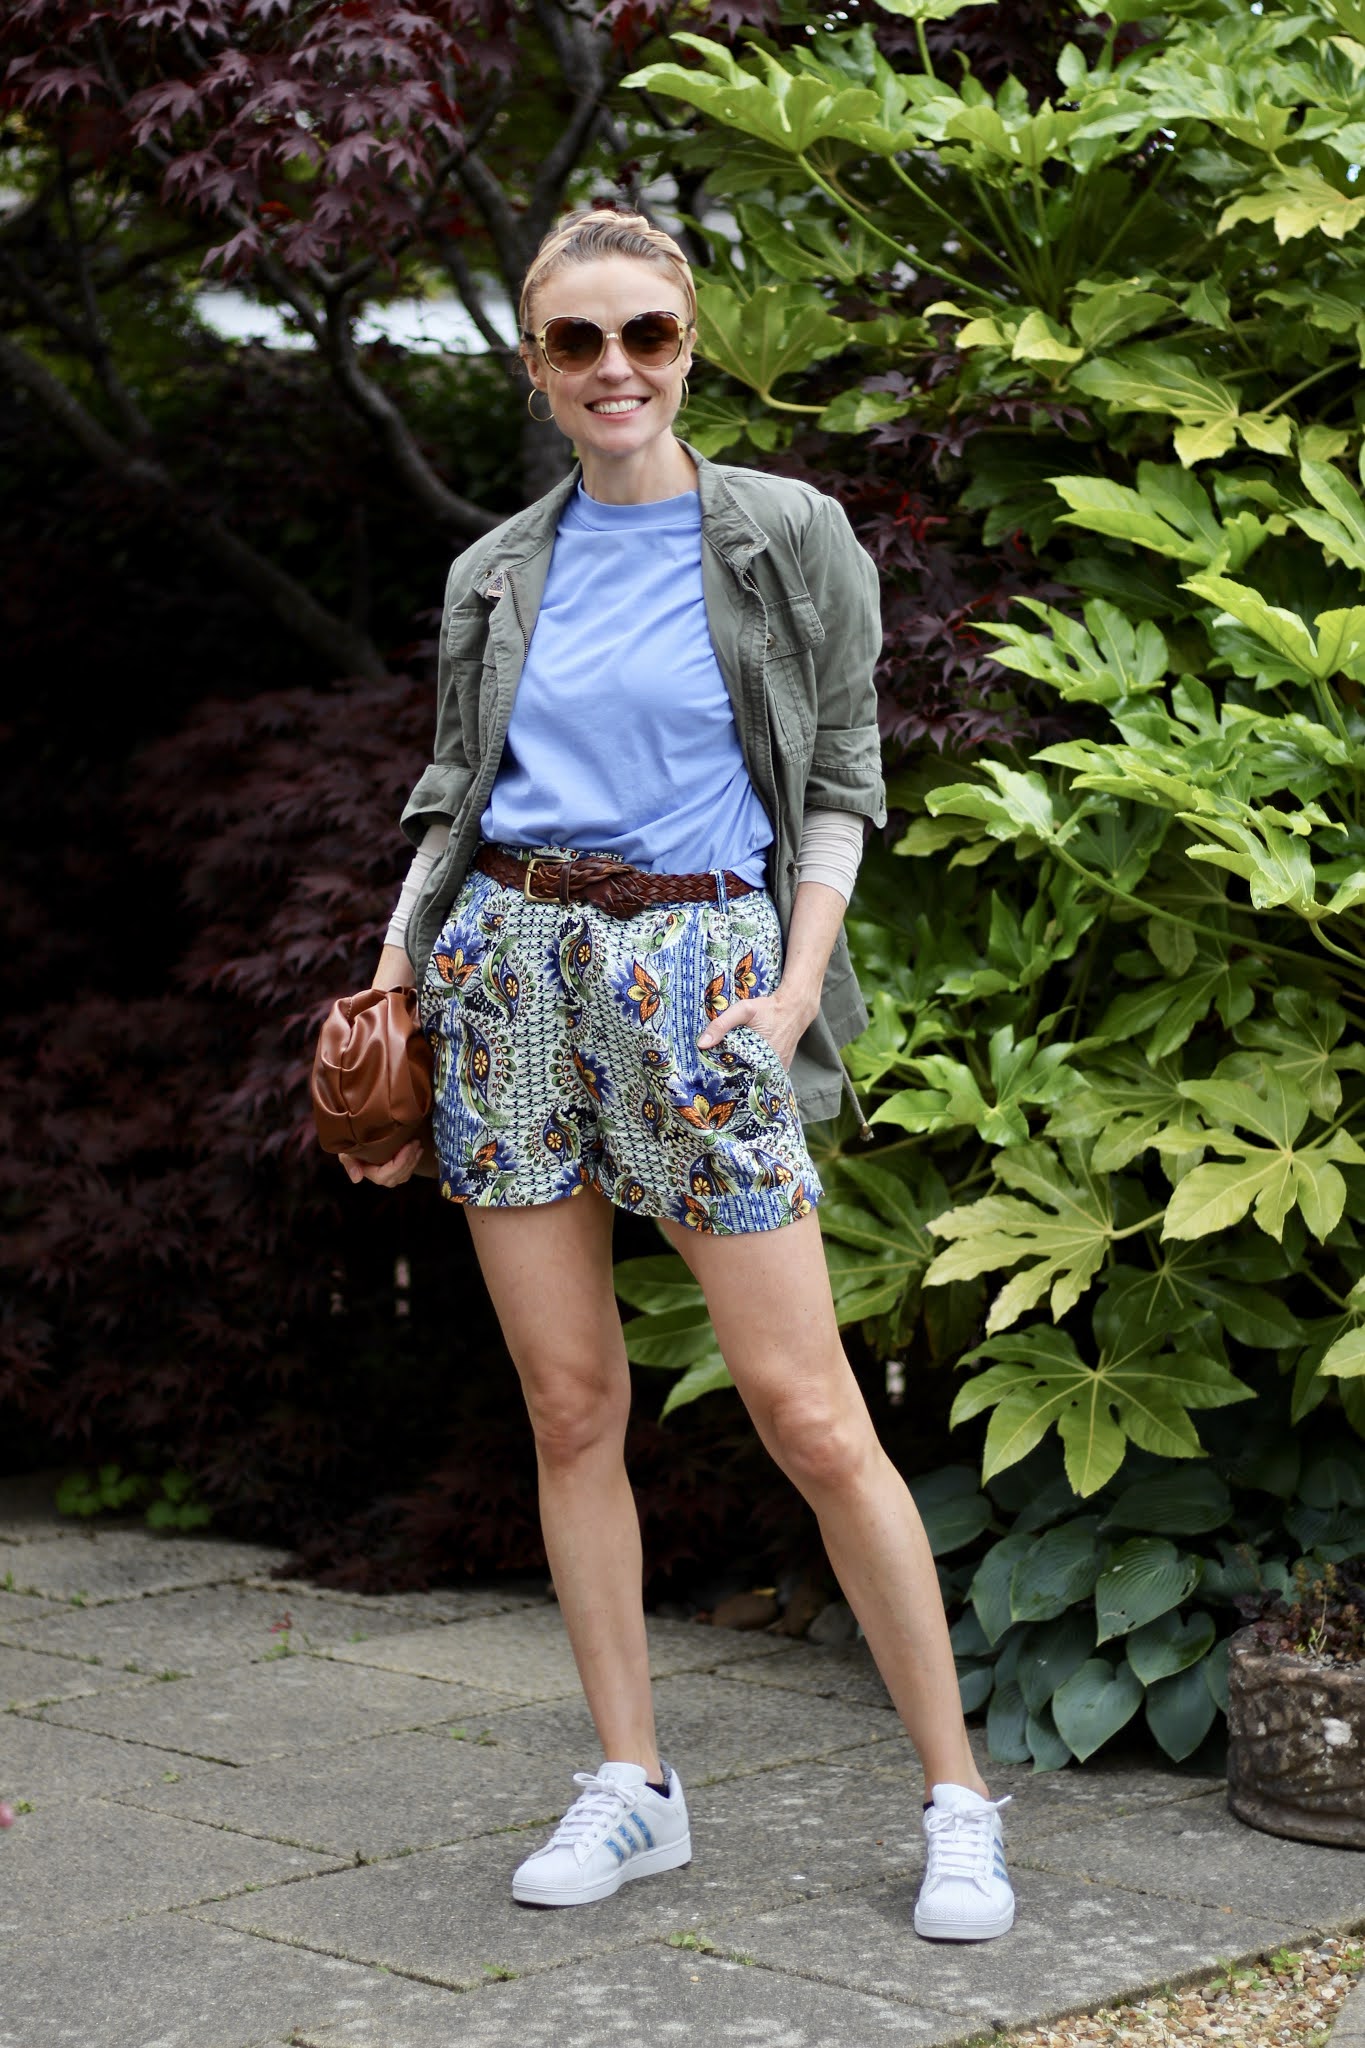 Patterned shorts and Army jacket, over 40.